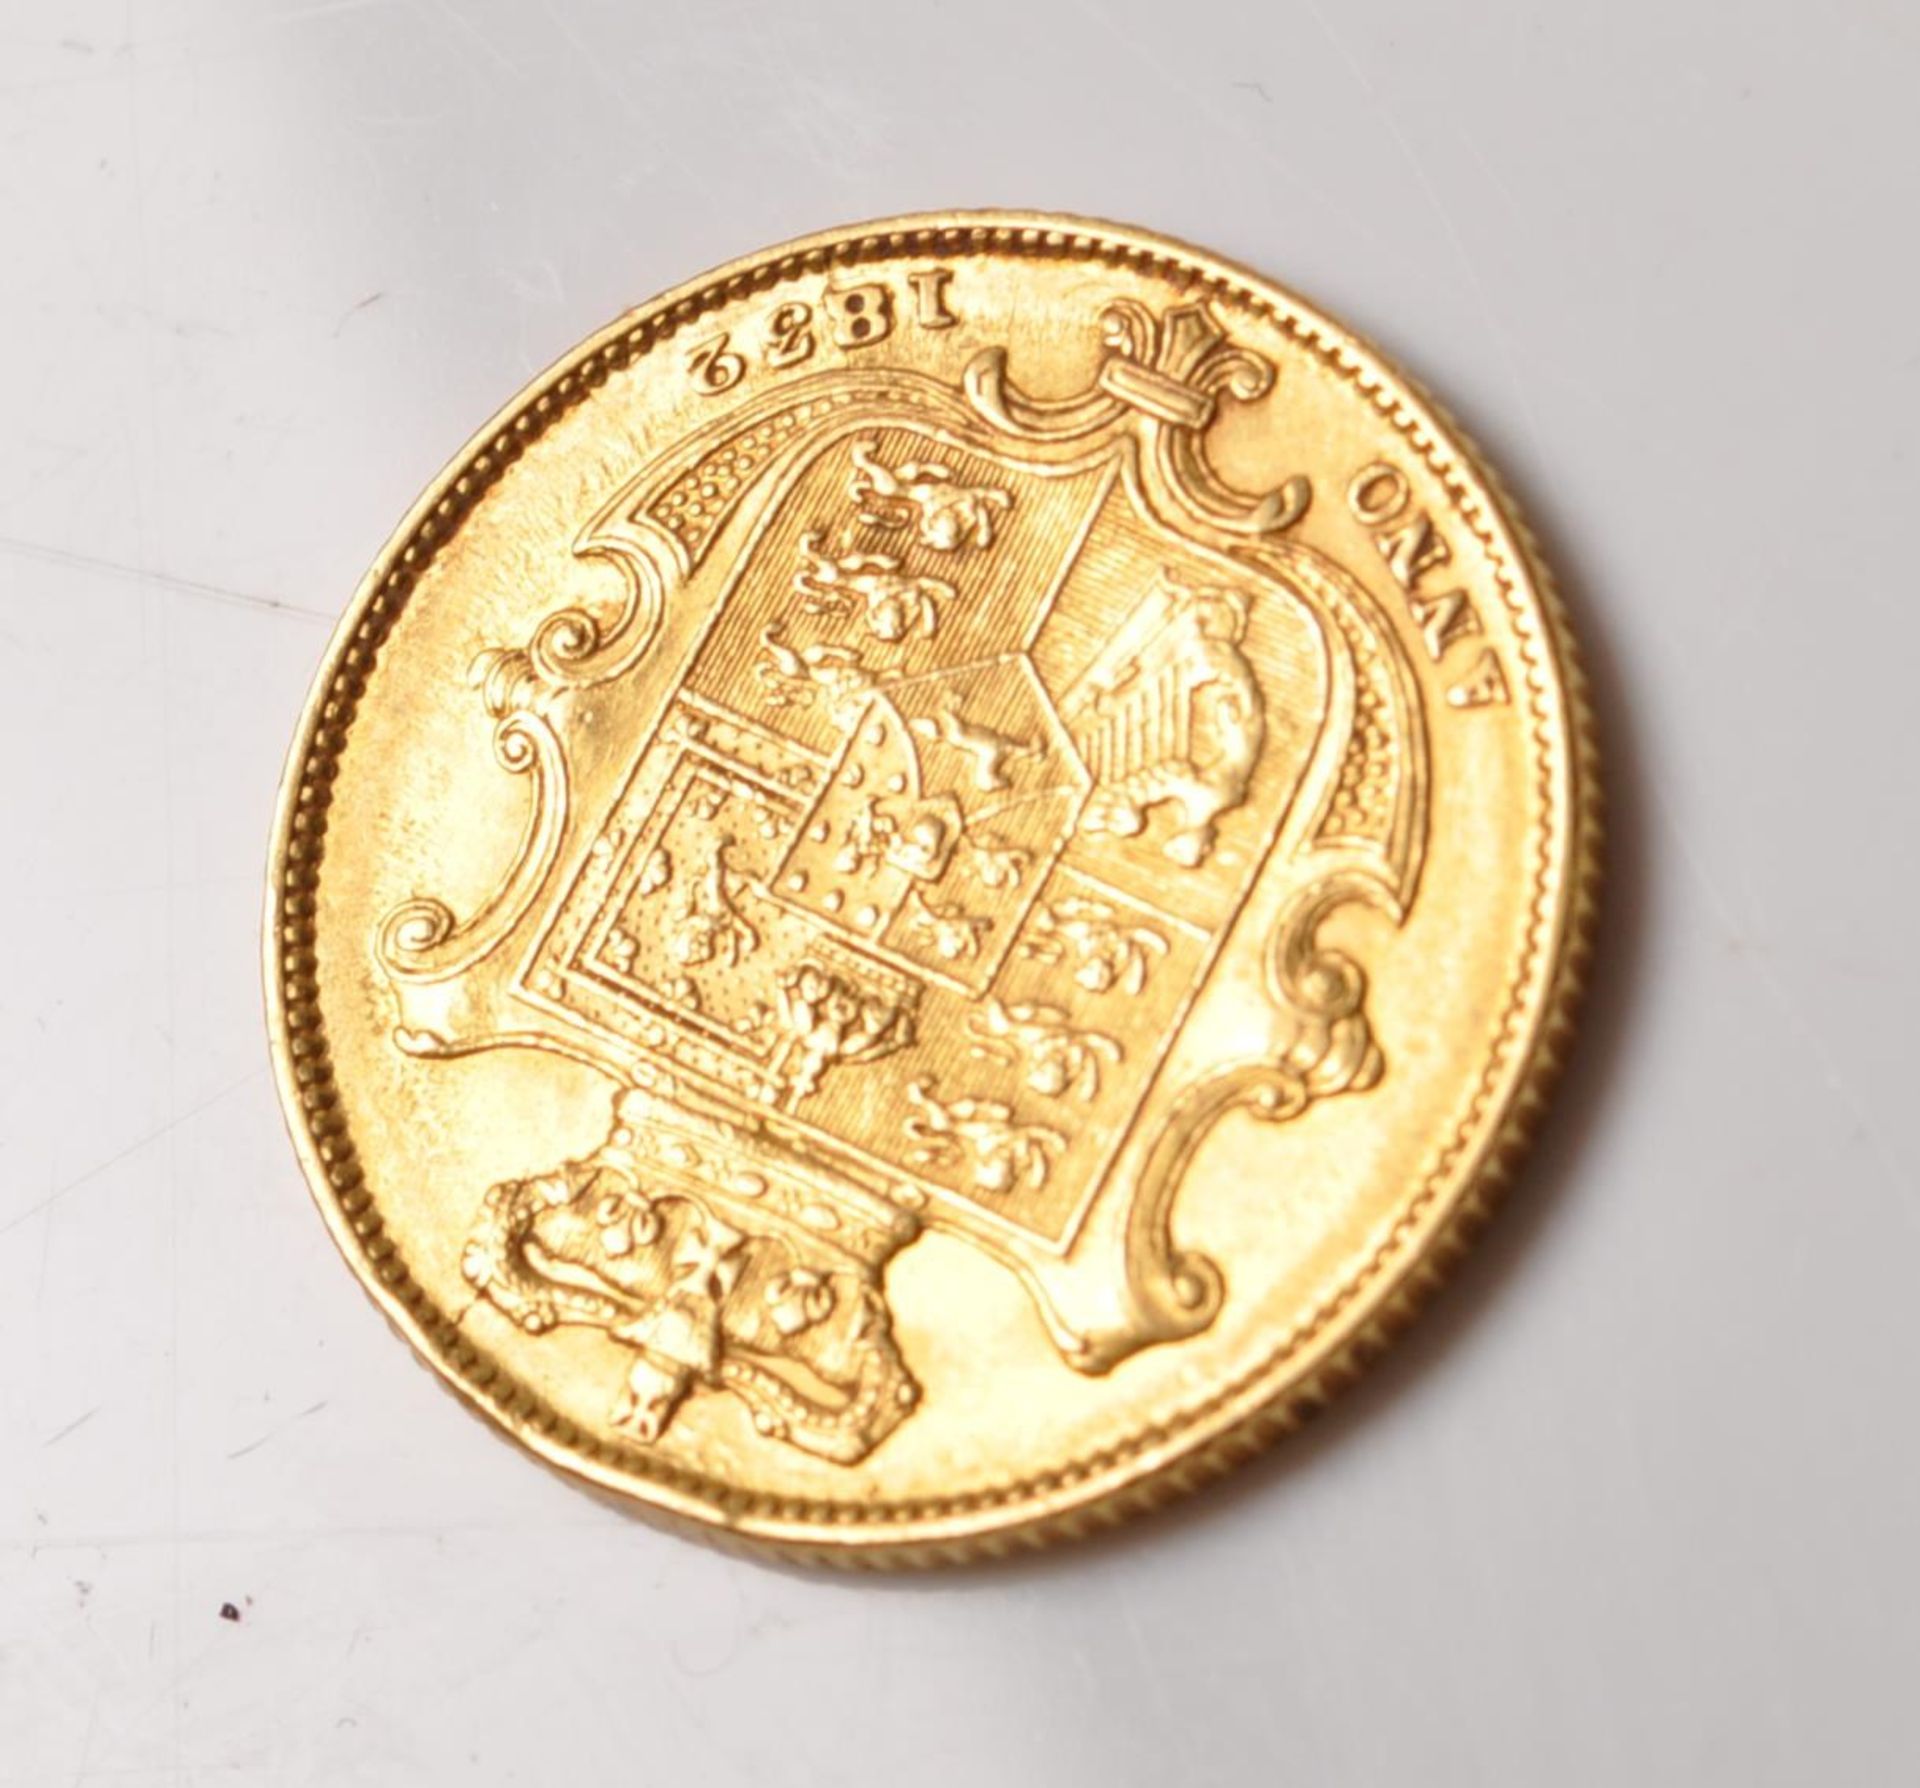 1832 WILLIAM IV GOLD SOVEREIGN COIN